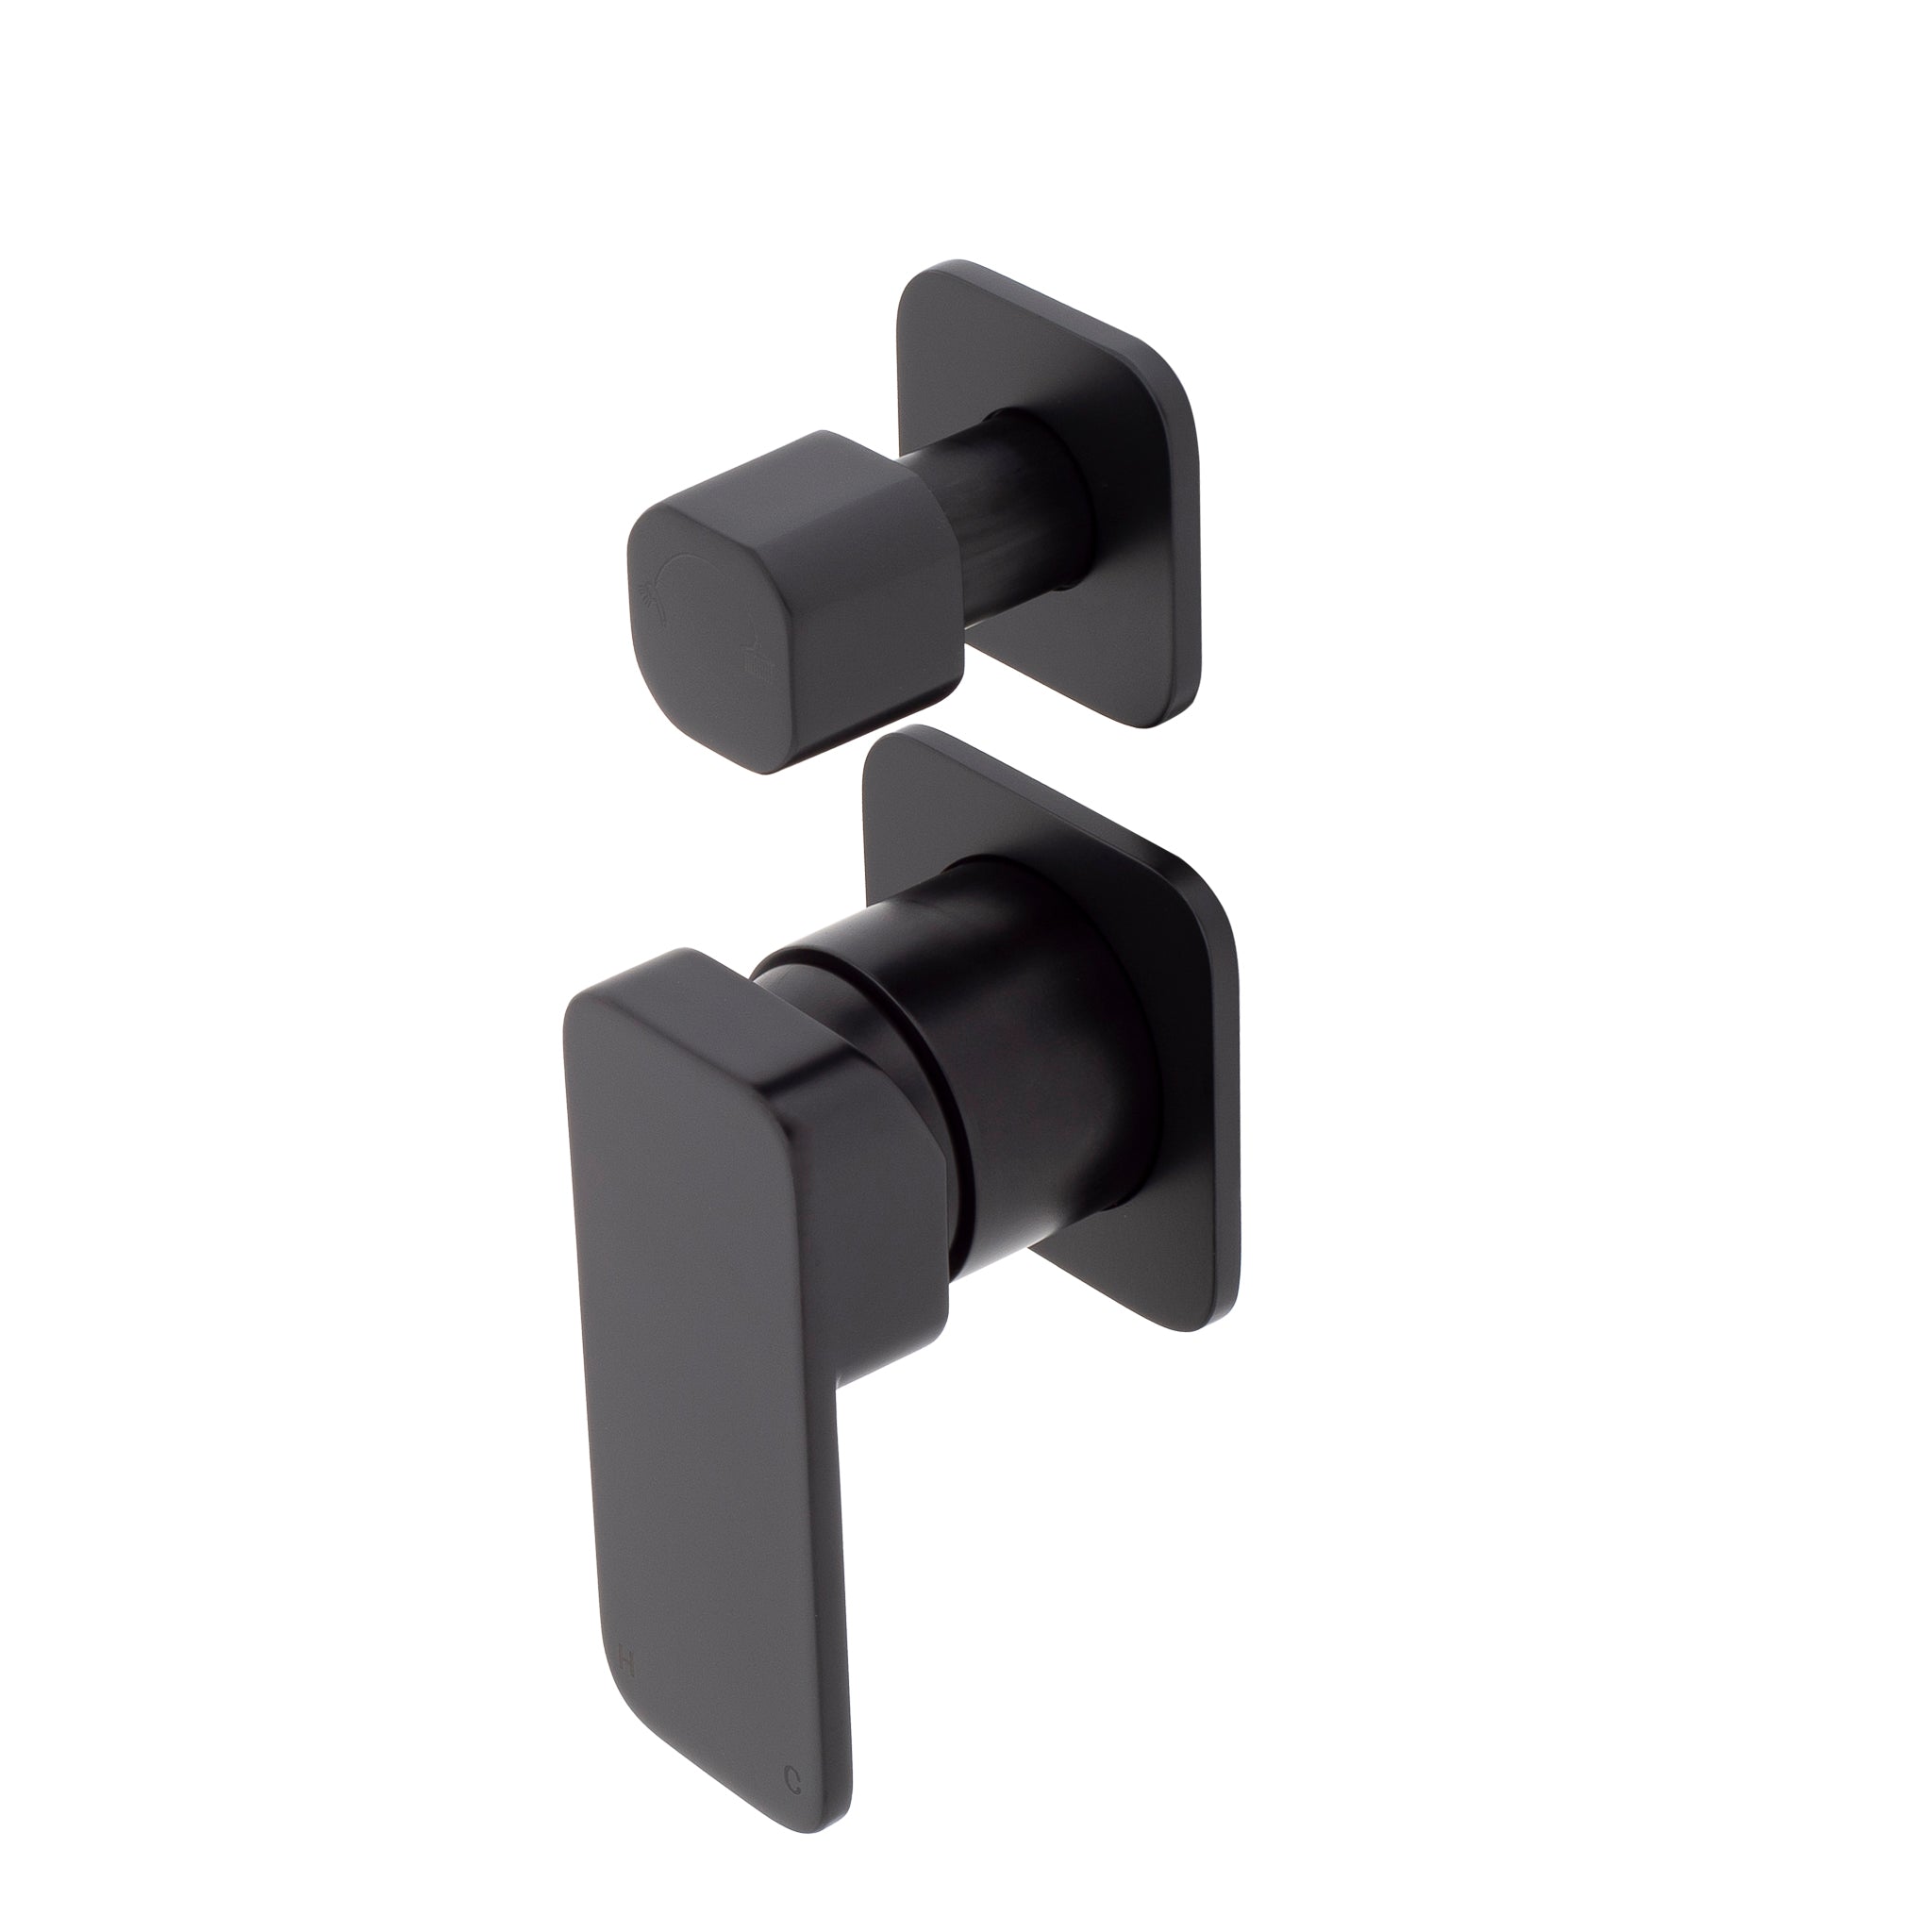 Kiki Shower/ Bath Wall Mixer with Diverter and Square Plates, Matte Black